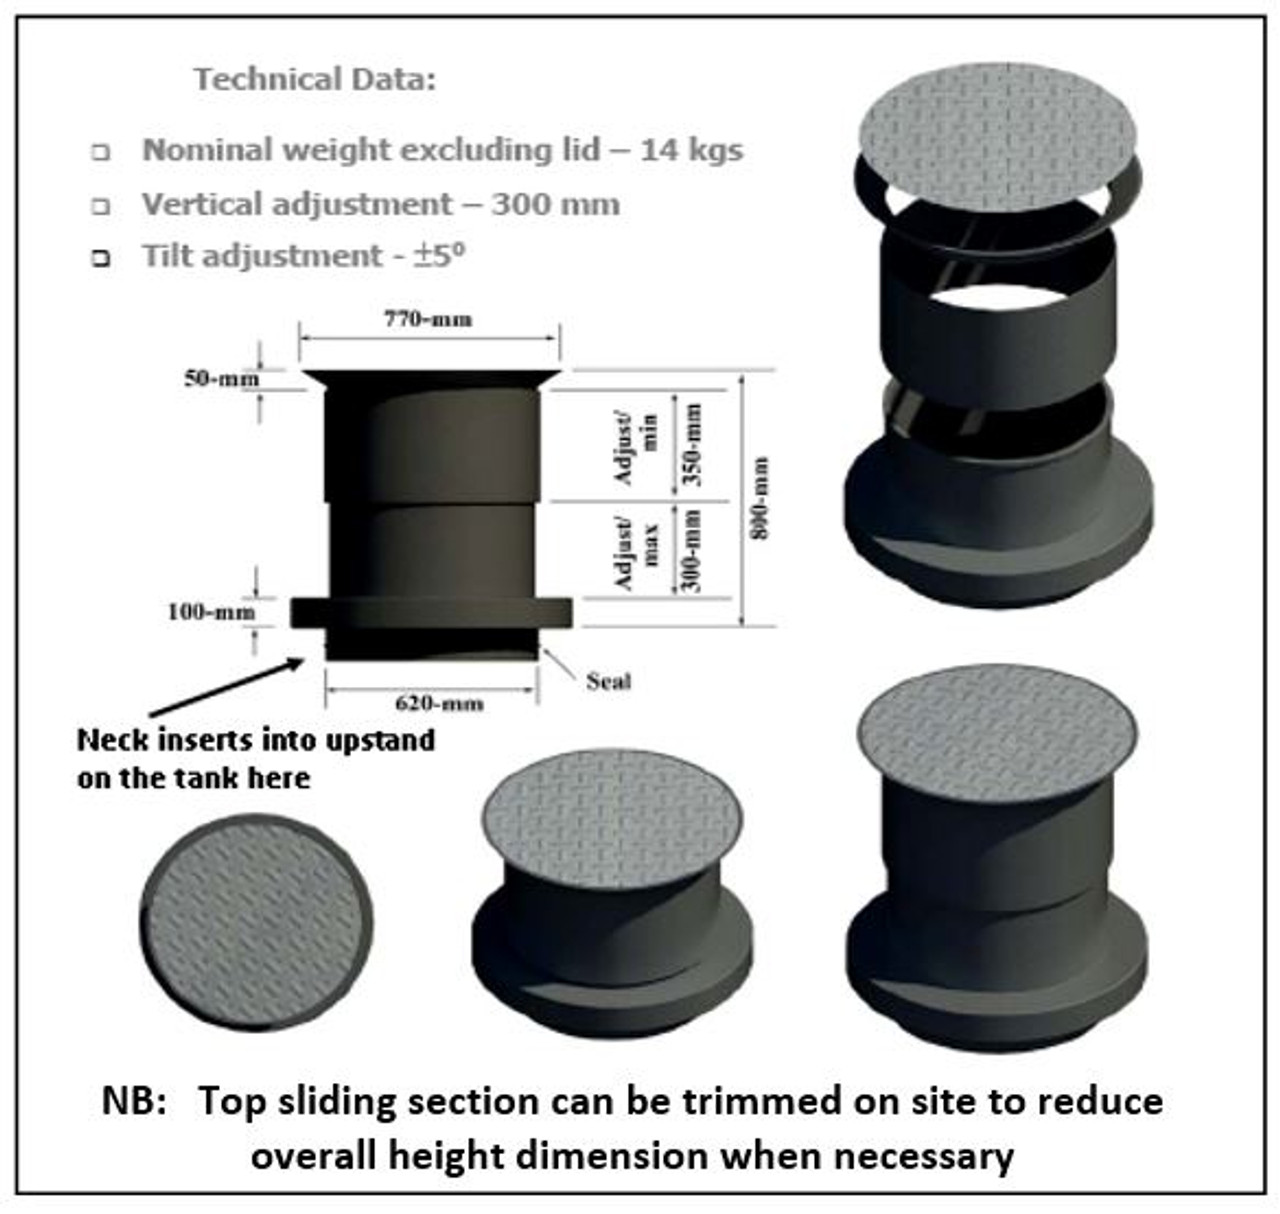 Telescopic Neck and Lid Assembly Details